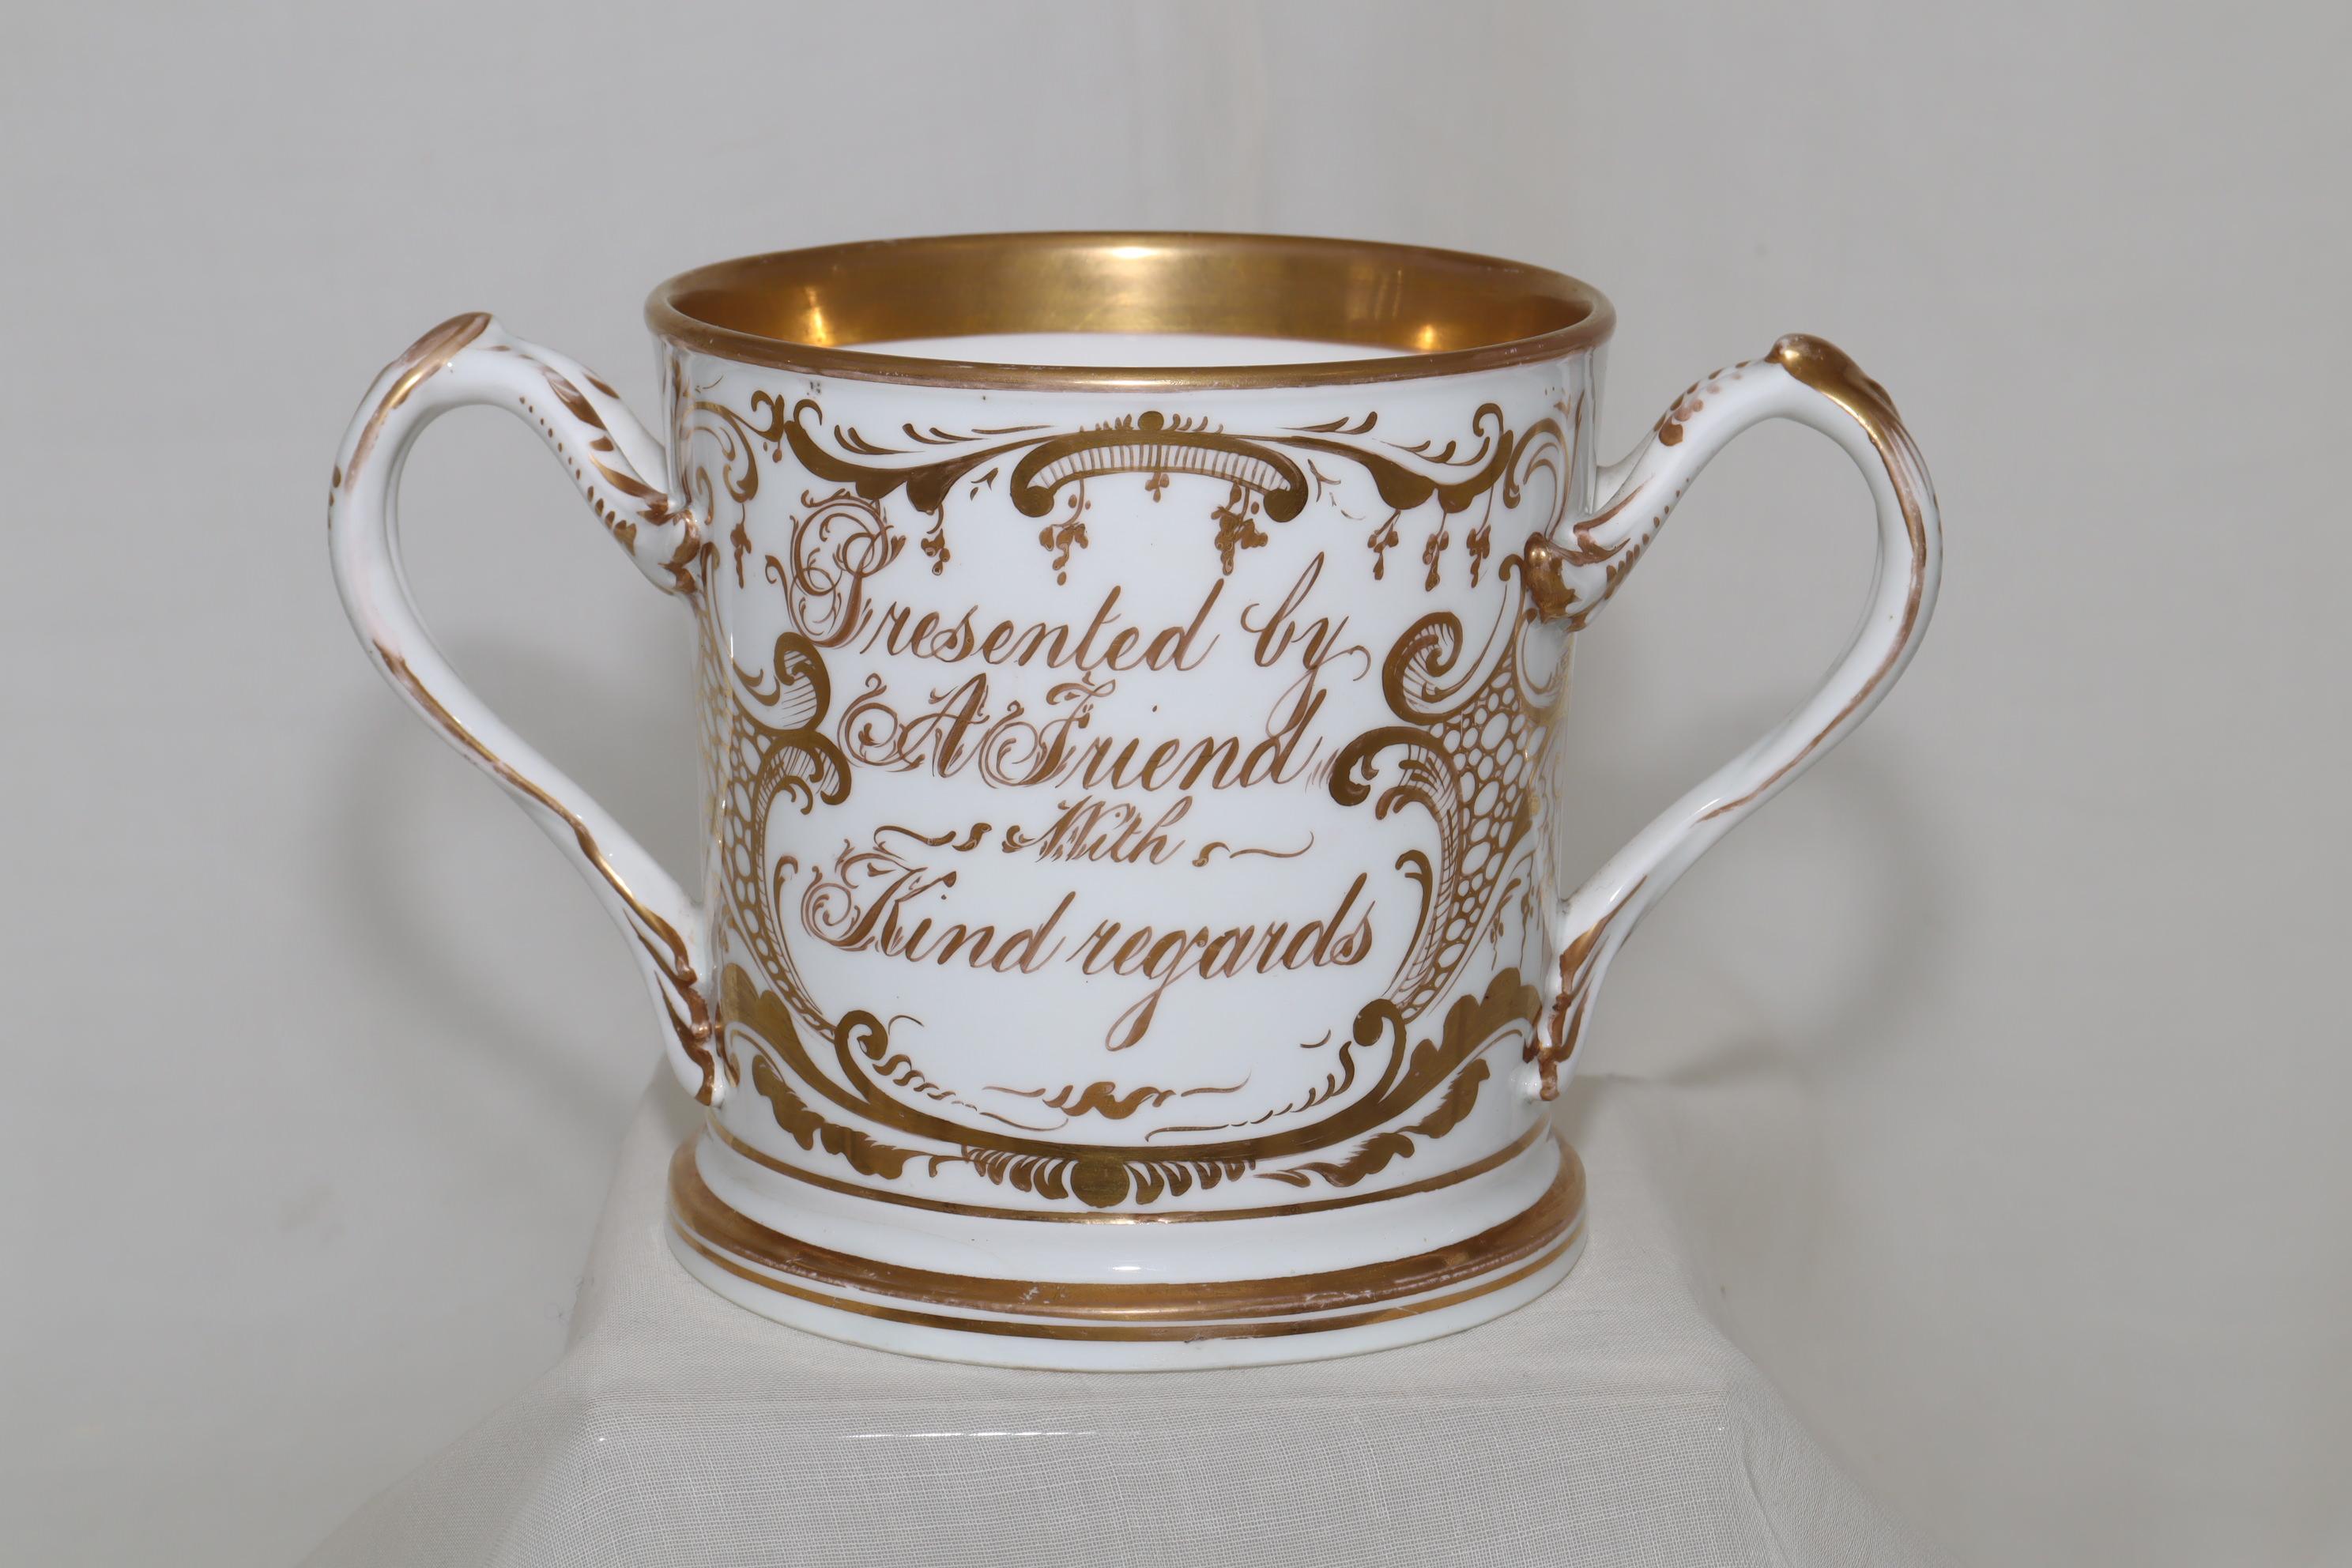 This large, superbly gilded loving cup, carries on one side, the inscription 